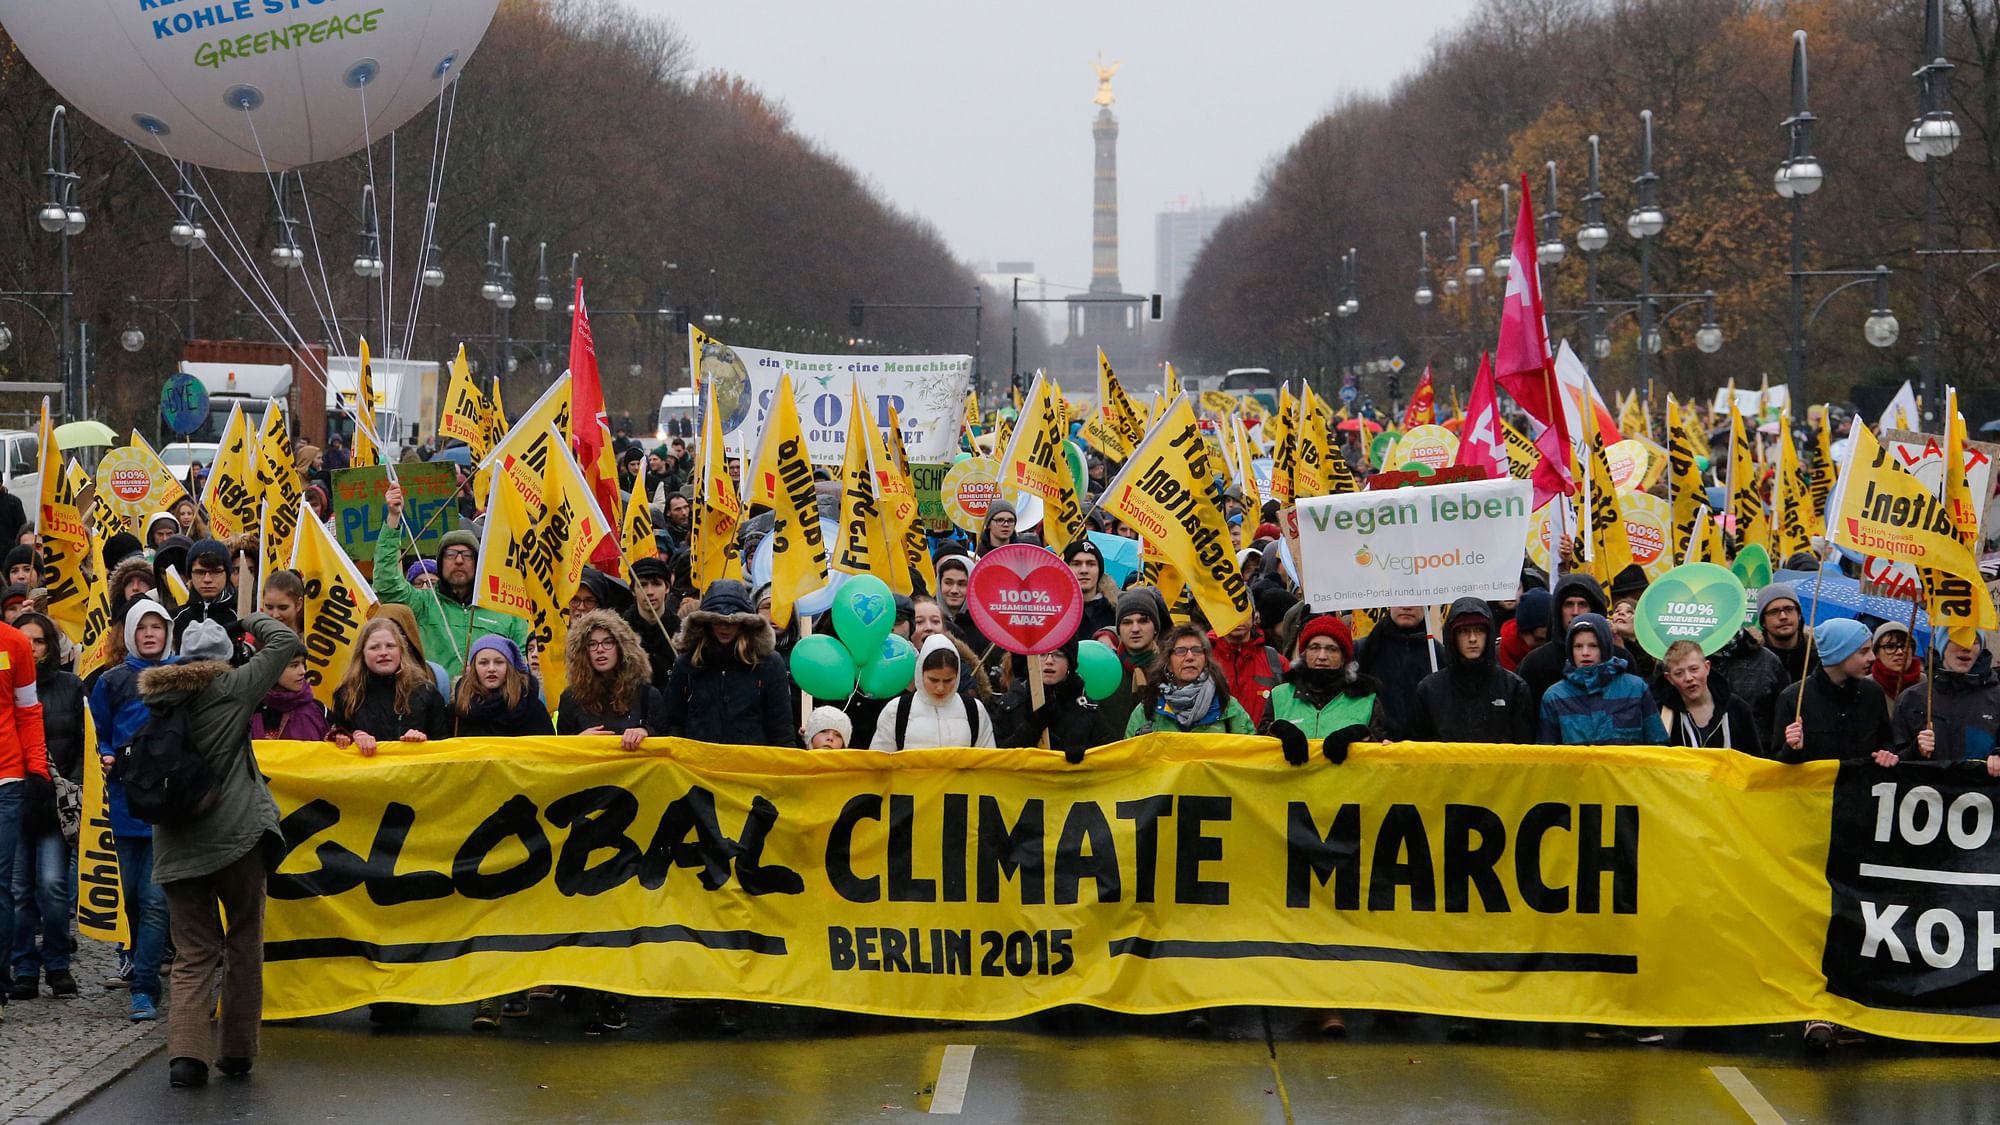 People demonstrate during a protest march ahead of the 2015 Paris Climate Conference, known as the COP21 summit, along Strasse des 17 Juni in Berlin, Germany. (Photo: Reuters)